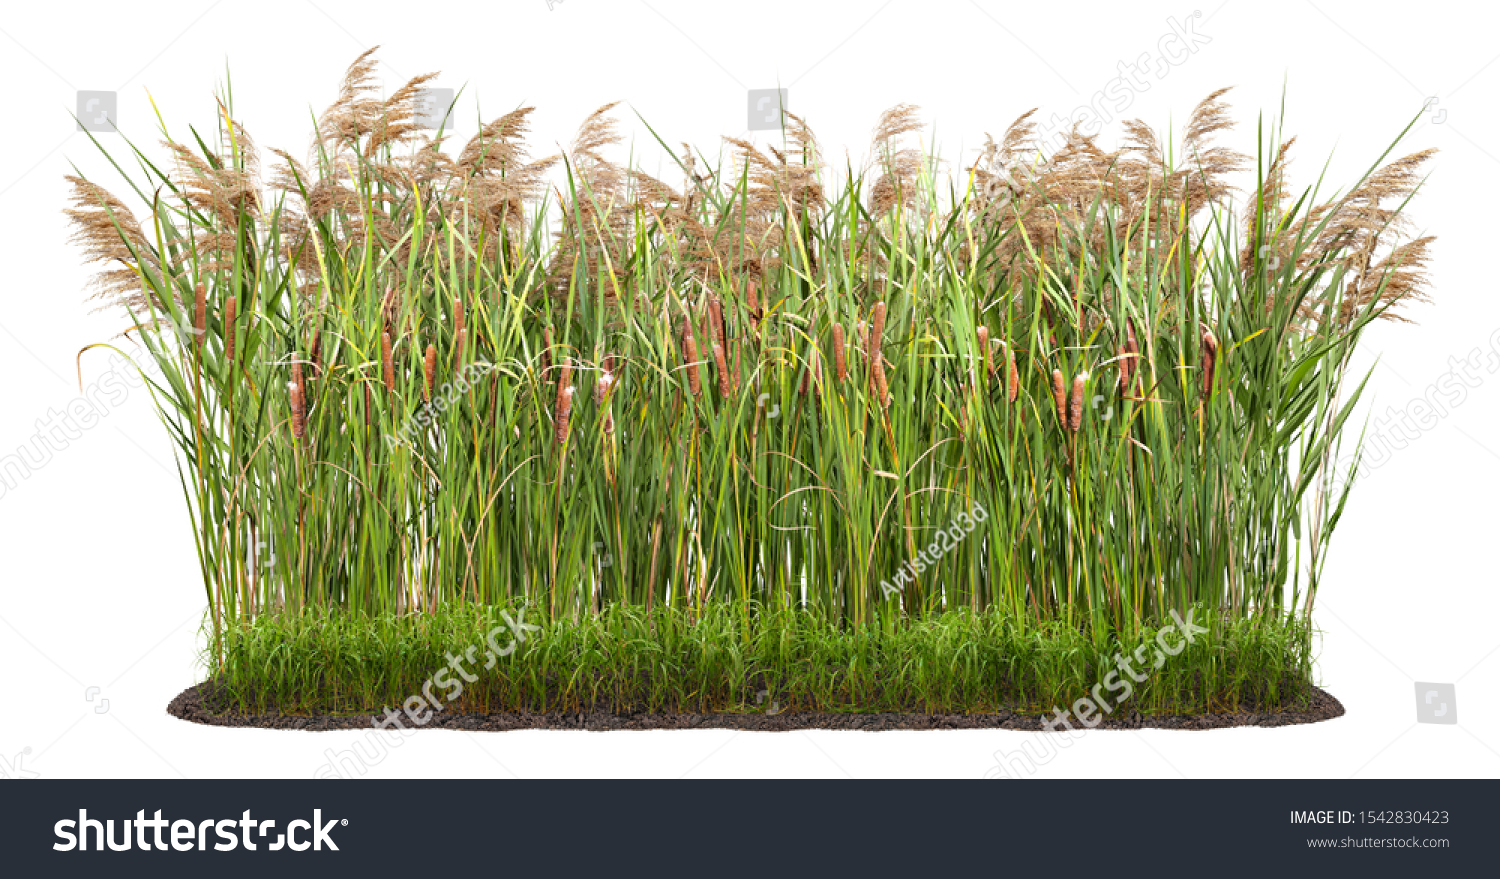 Cut out plant. Reed grass.
Cattail and reed plant isolated on white background. Cutout distaff and bulrush. High quality clipping mask for professional composition.
 #1542830423